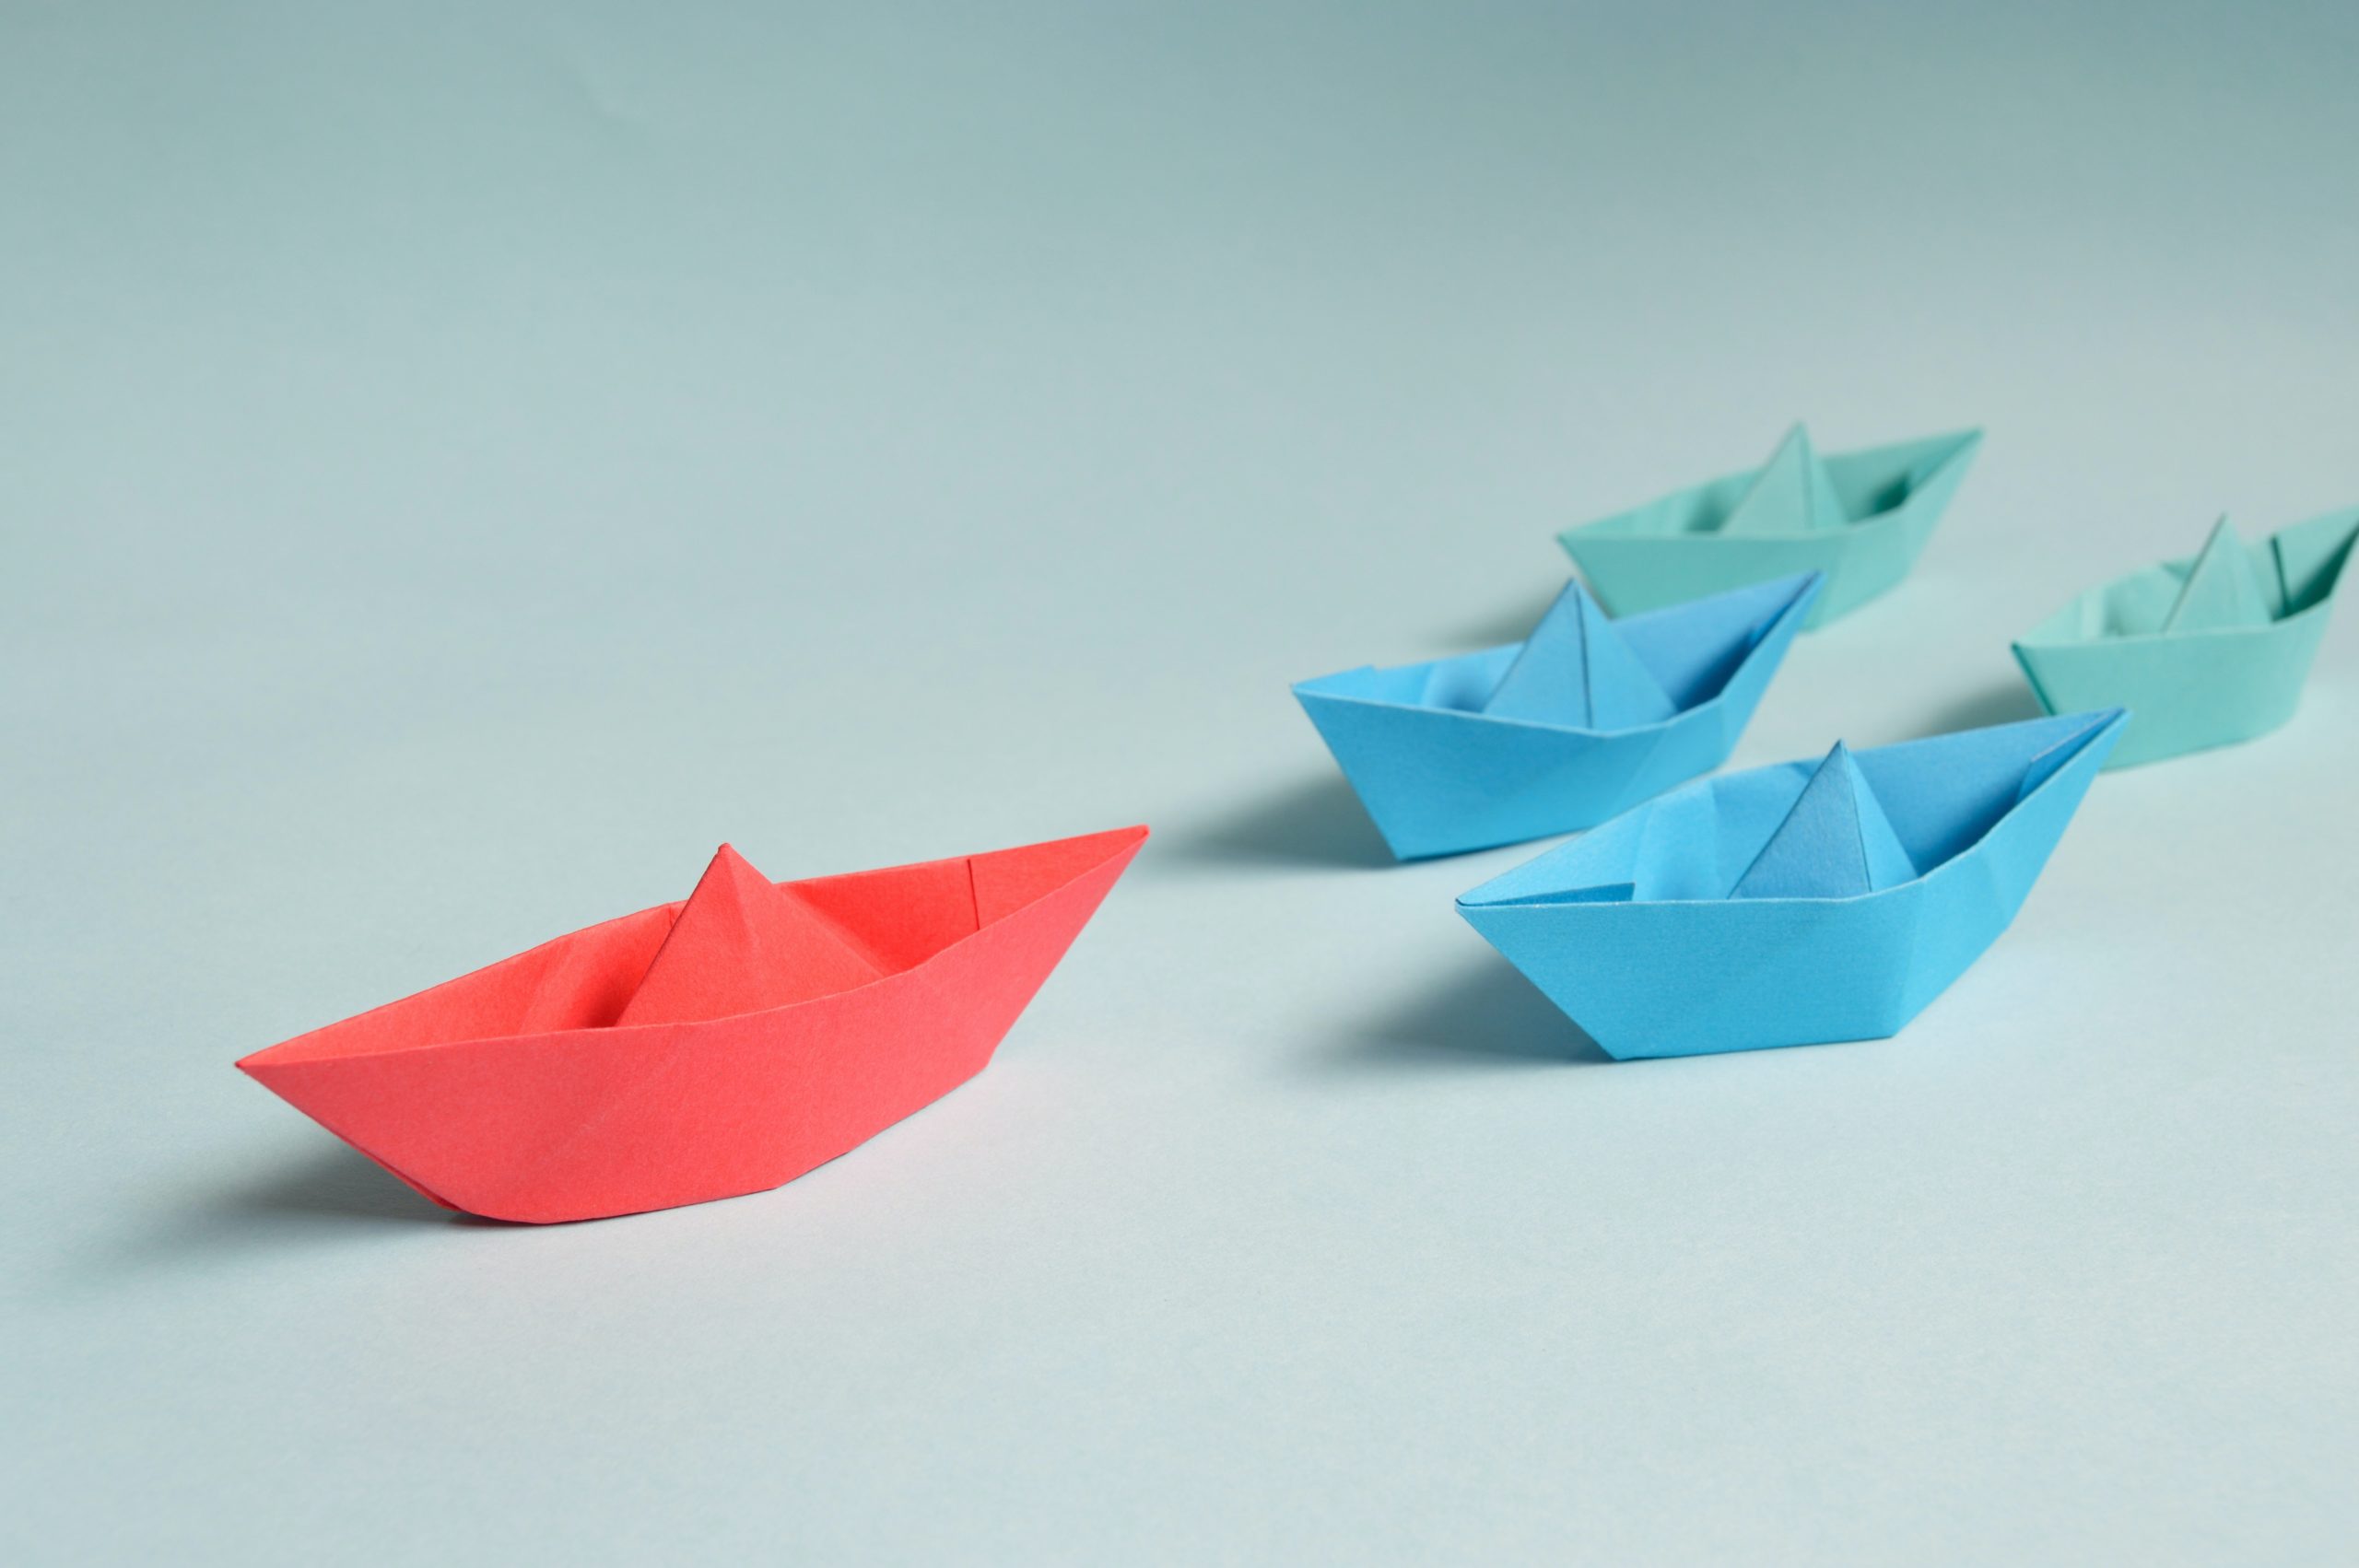 Red paper boat with two blue and two teal paper boats behind it on white surface.